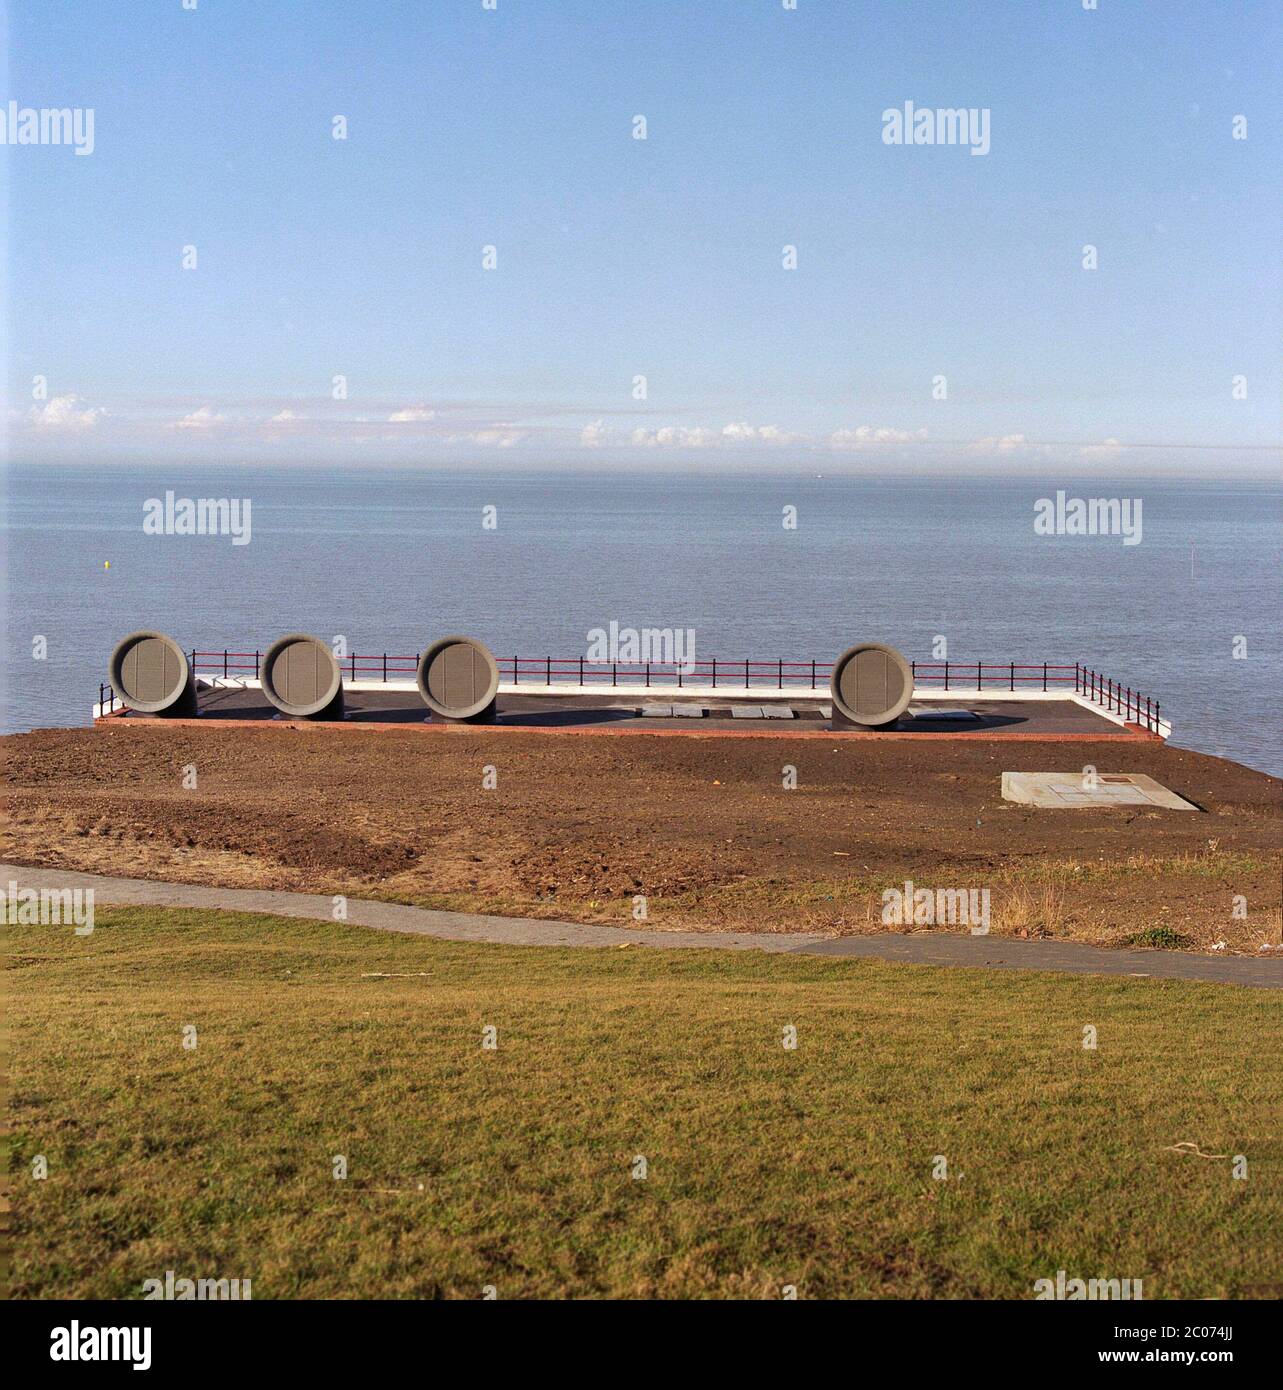 1996, newly opened water treatment works, Herne Bay, Kent, South East England, UK showing trumpet shaped circular ventilators. Stock Photo